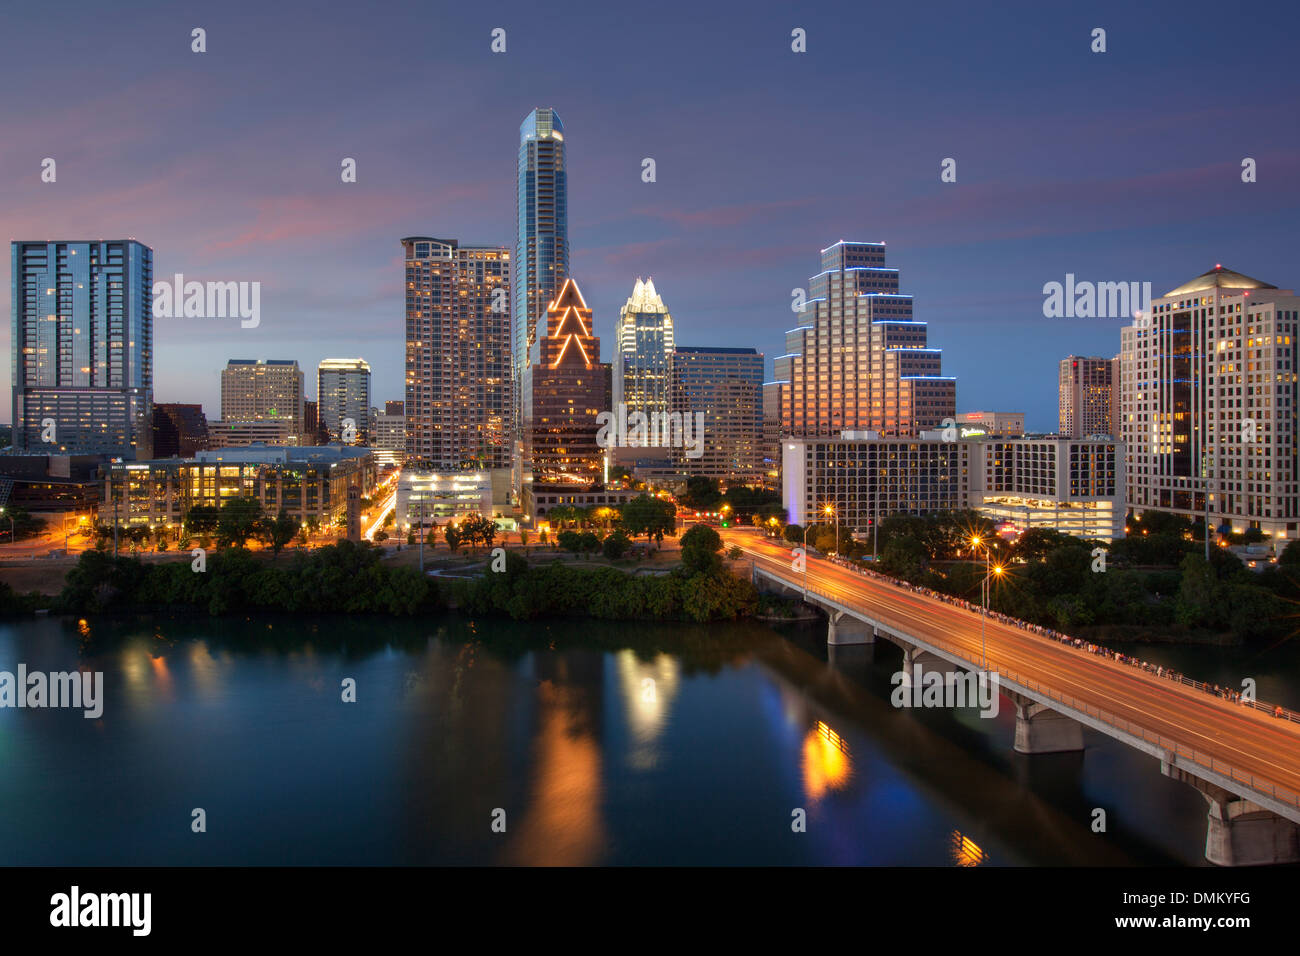 The Austin skyline in the evening glows in the evening light. The reflections of the highrises are reflected in the water. Stock Photo